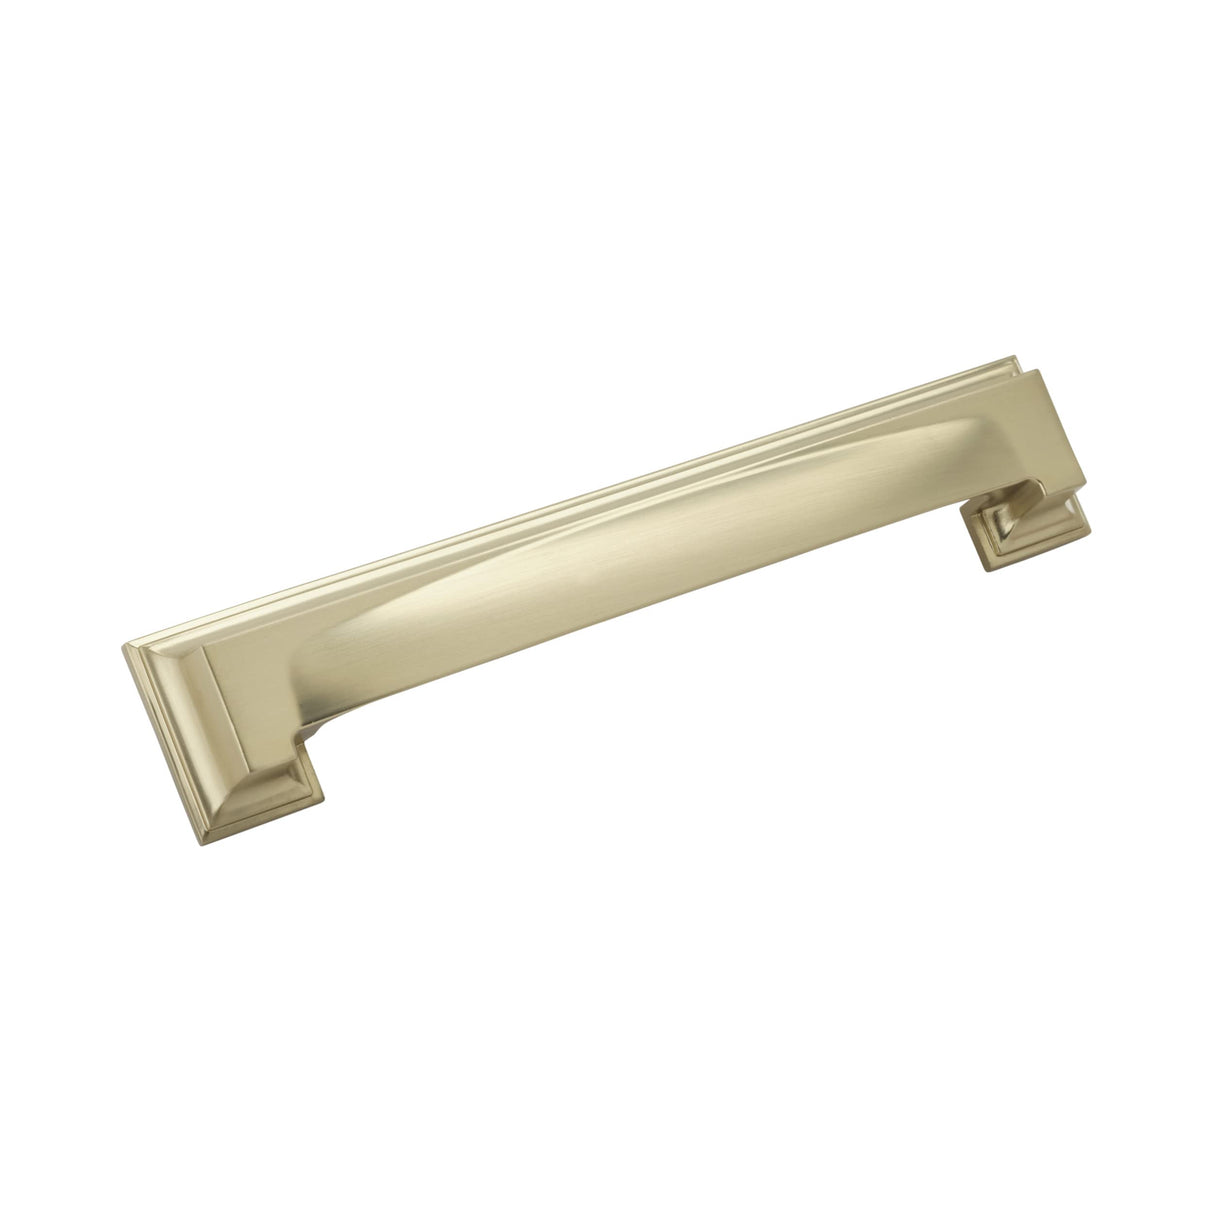 Amerock Cabinet Cup Pull Golden Champagne 5-1/16 inch & 6-5/16 inch (128 mm & 160 mm) Center to Center Appoint 1 Pack Drawer Pull Drawer Handle Cabinet Hardware